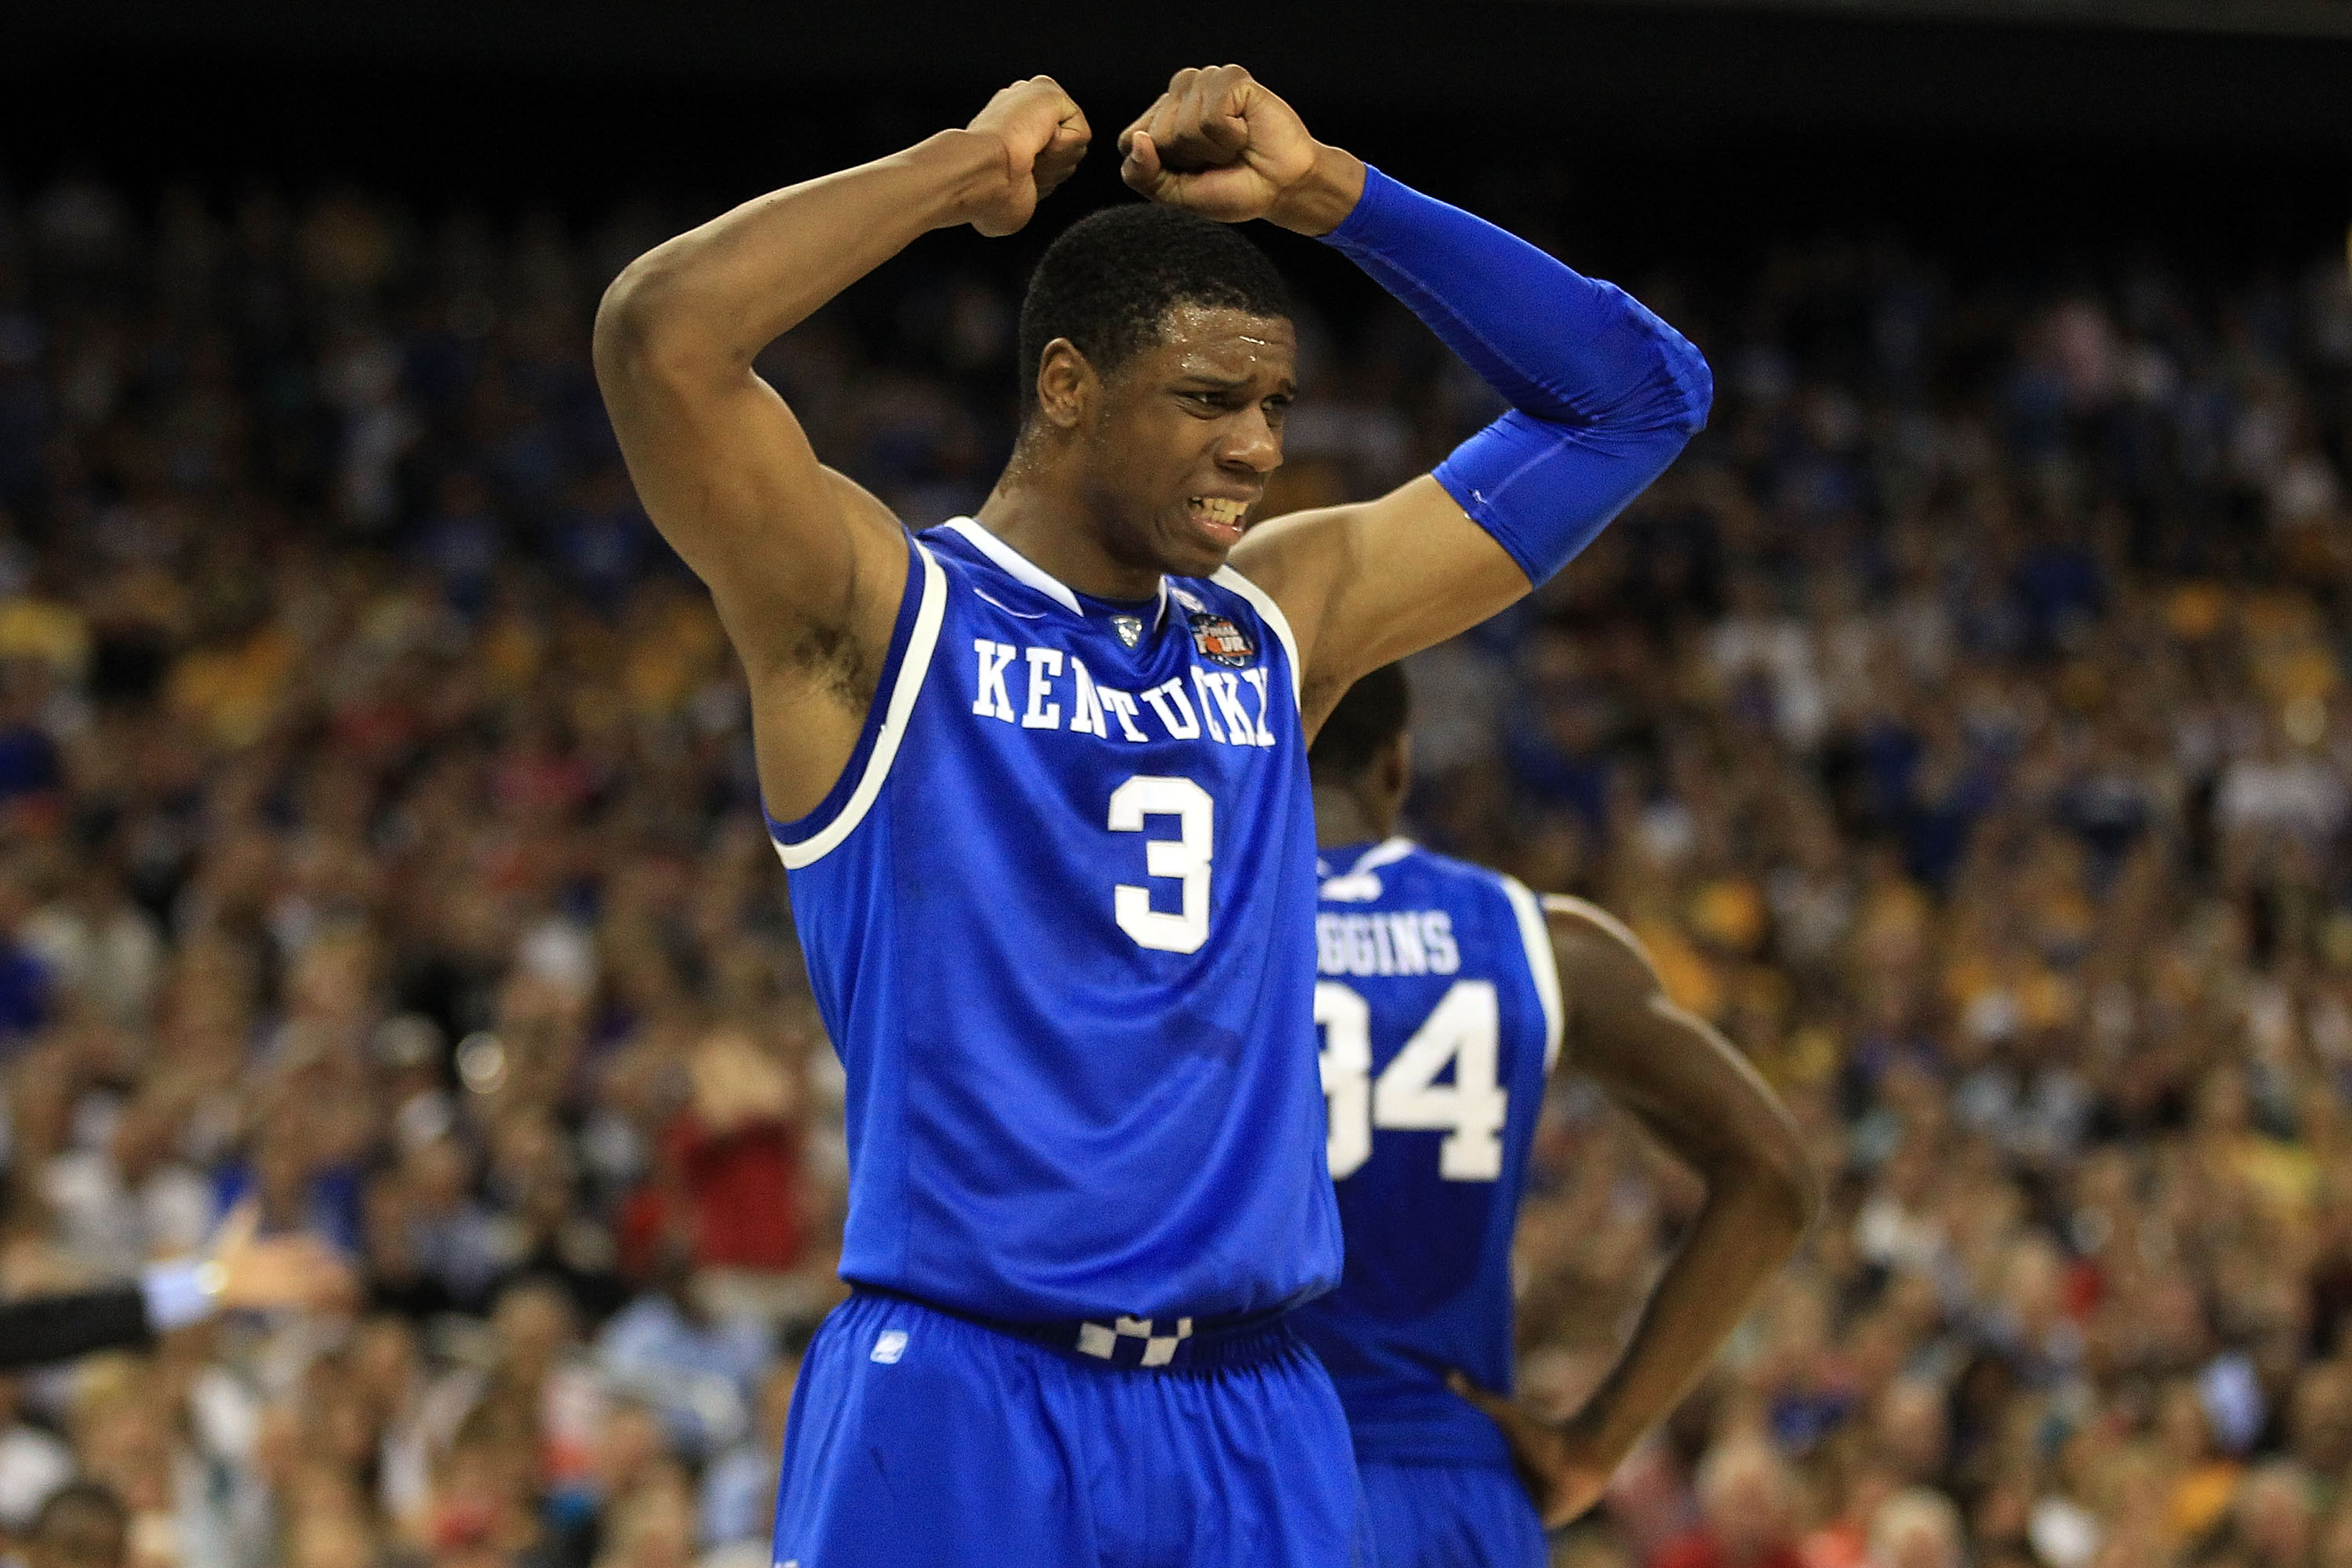 HOUSTON, TX - APRIL 02:  Terrence Jones #3 of the Kentucky Wildcats reacts after a play against the Connecticut Huskies during the National Semifinal game of the 2011 NCAA Division I Men's Basketball Championship at Reliant Stadium on April 2, 2011 in Hou